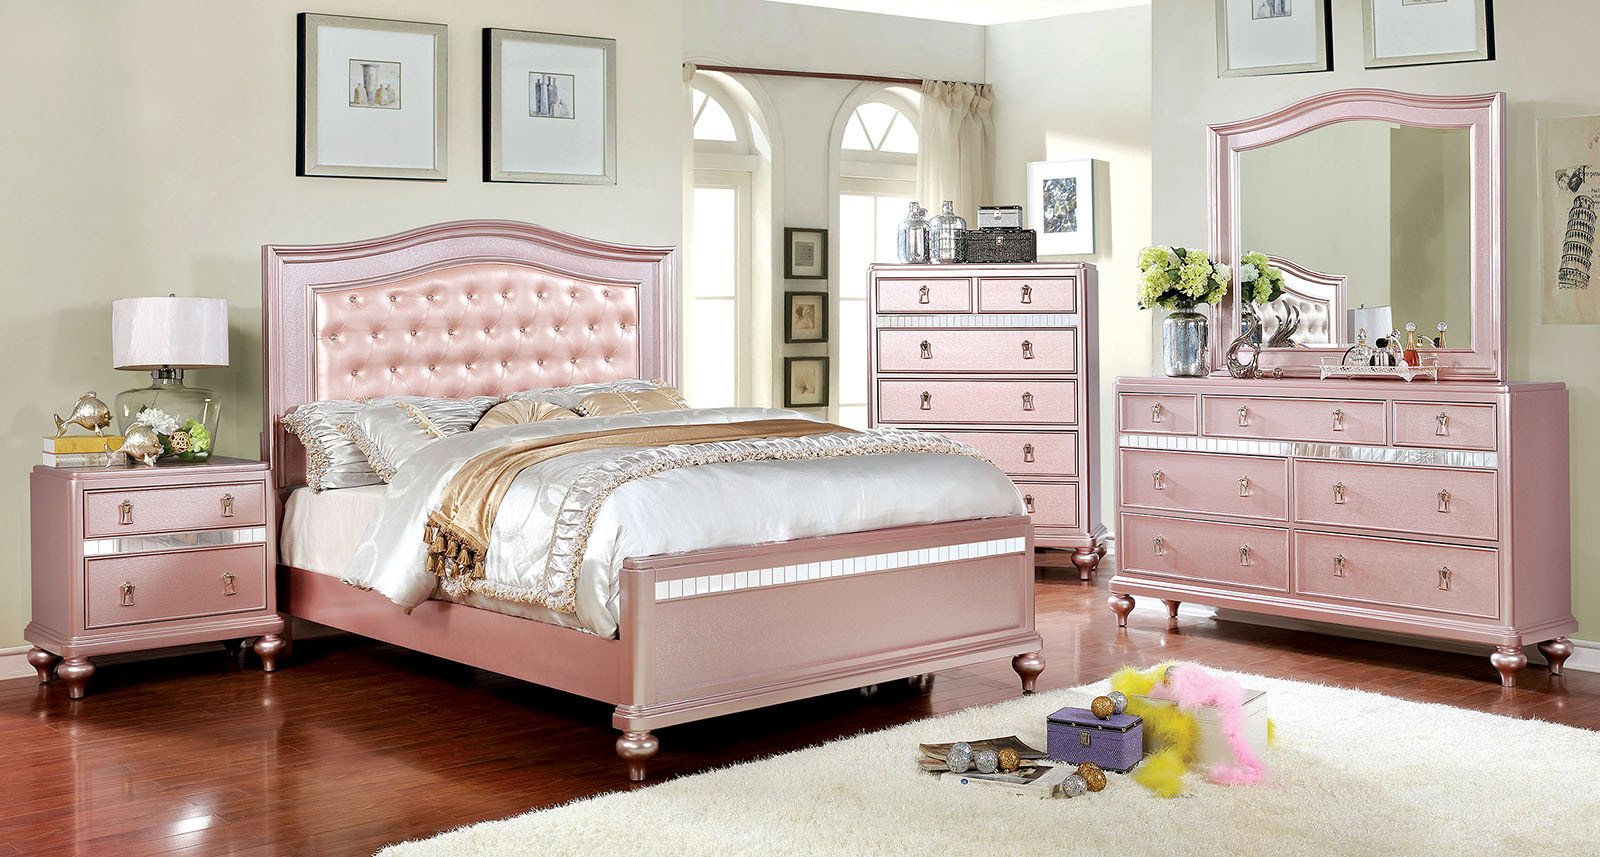 California King Size Bedroom Furniture Set New Ariston Rose Gold Finish Cal King Size Bed with Mirrored Trim Jeweled button Tufted Padded Leather Headboard